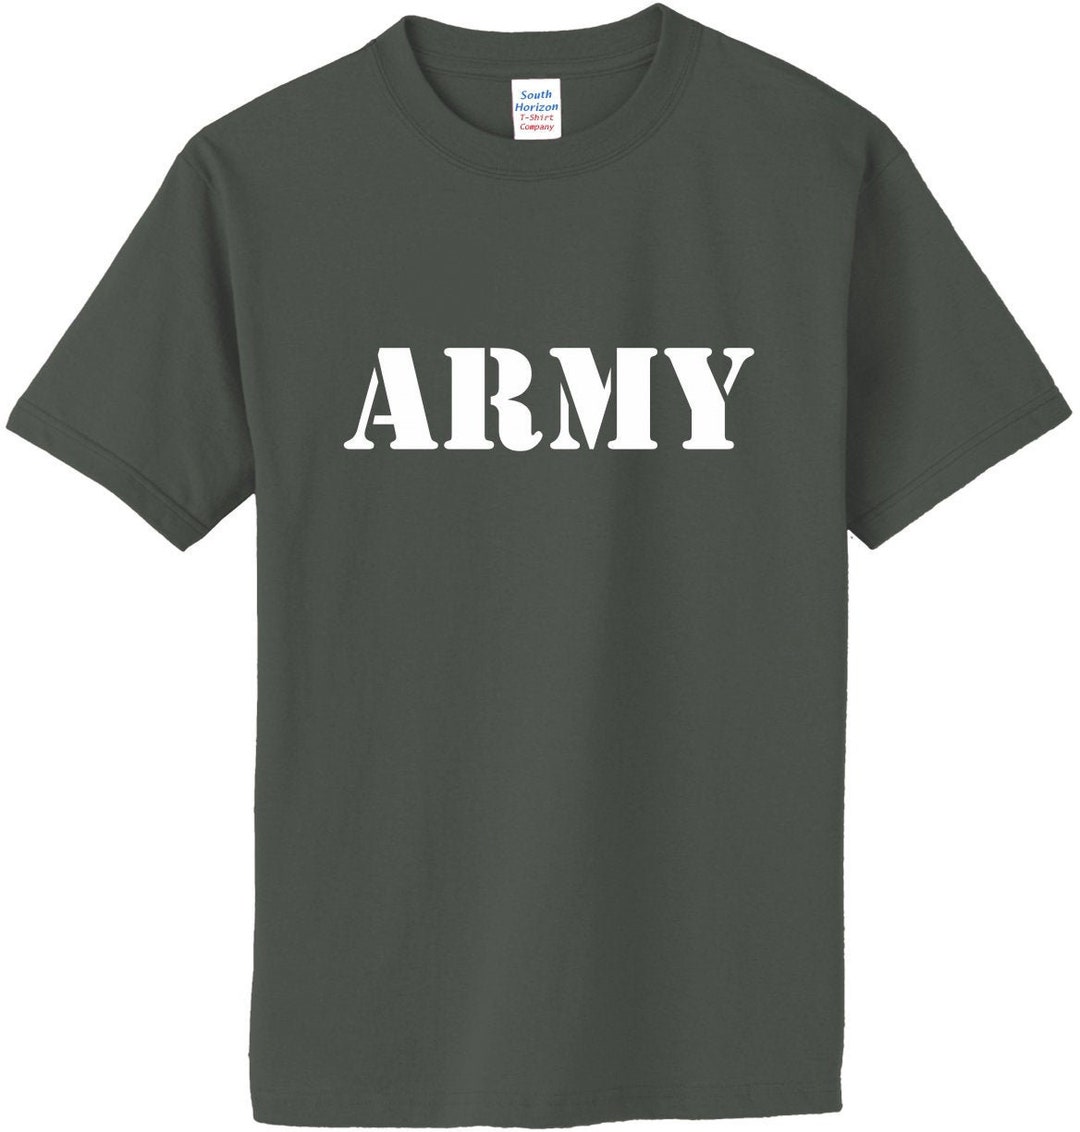 Army Adult and Youth Shirt Army Shirt Army Adult Shirt Army - Etsy